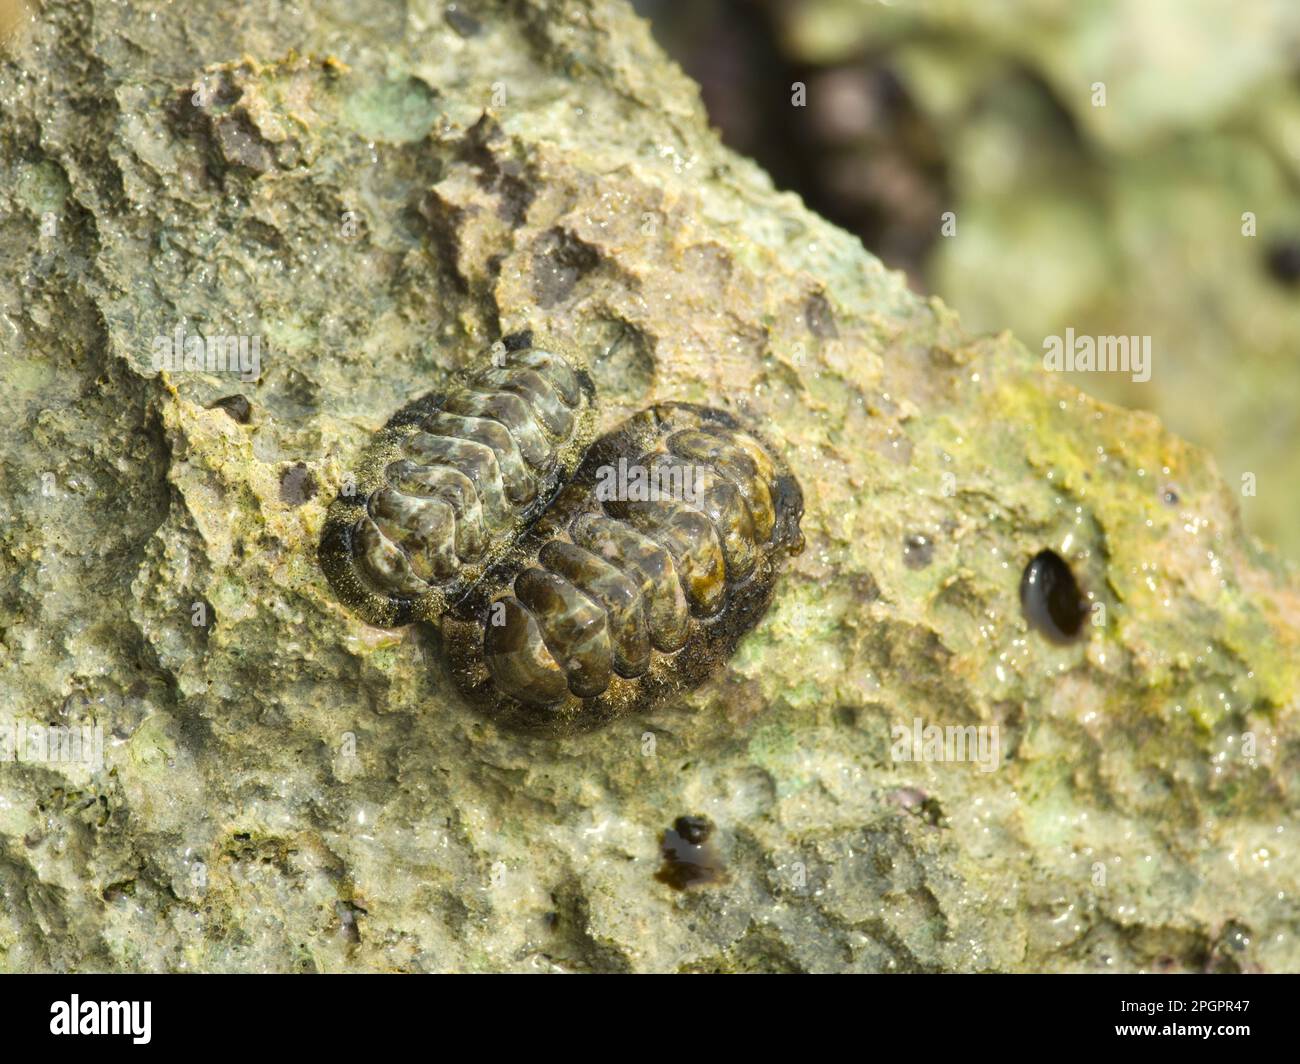 Beetle snail, Beetle snails, Other animals, Marine snails, Snails, Animals, Molluscs, Fuzzy Chiton (Acanthopleura granulata) two adults, on wave Stock Photo